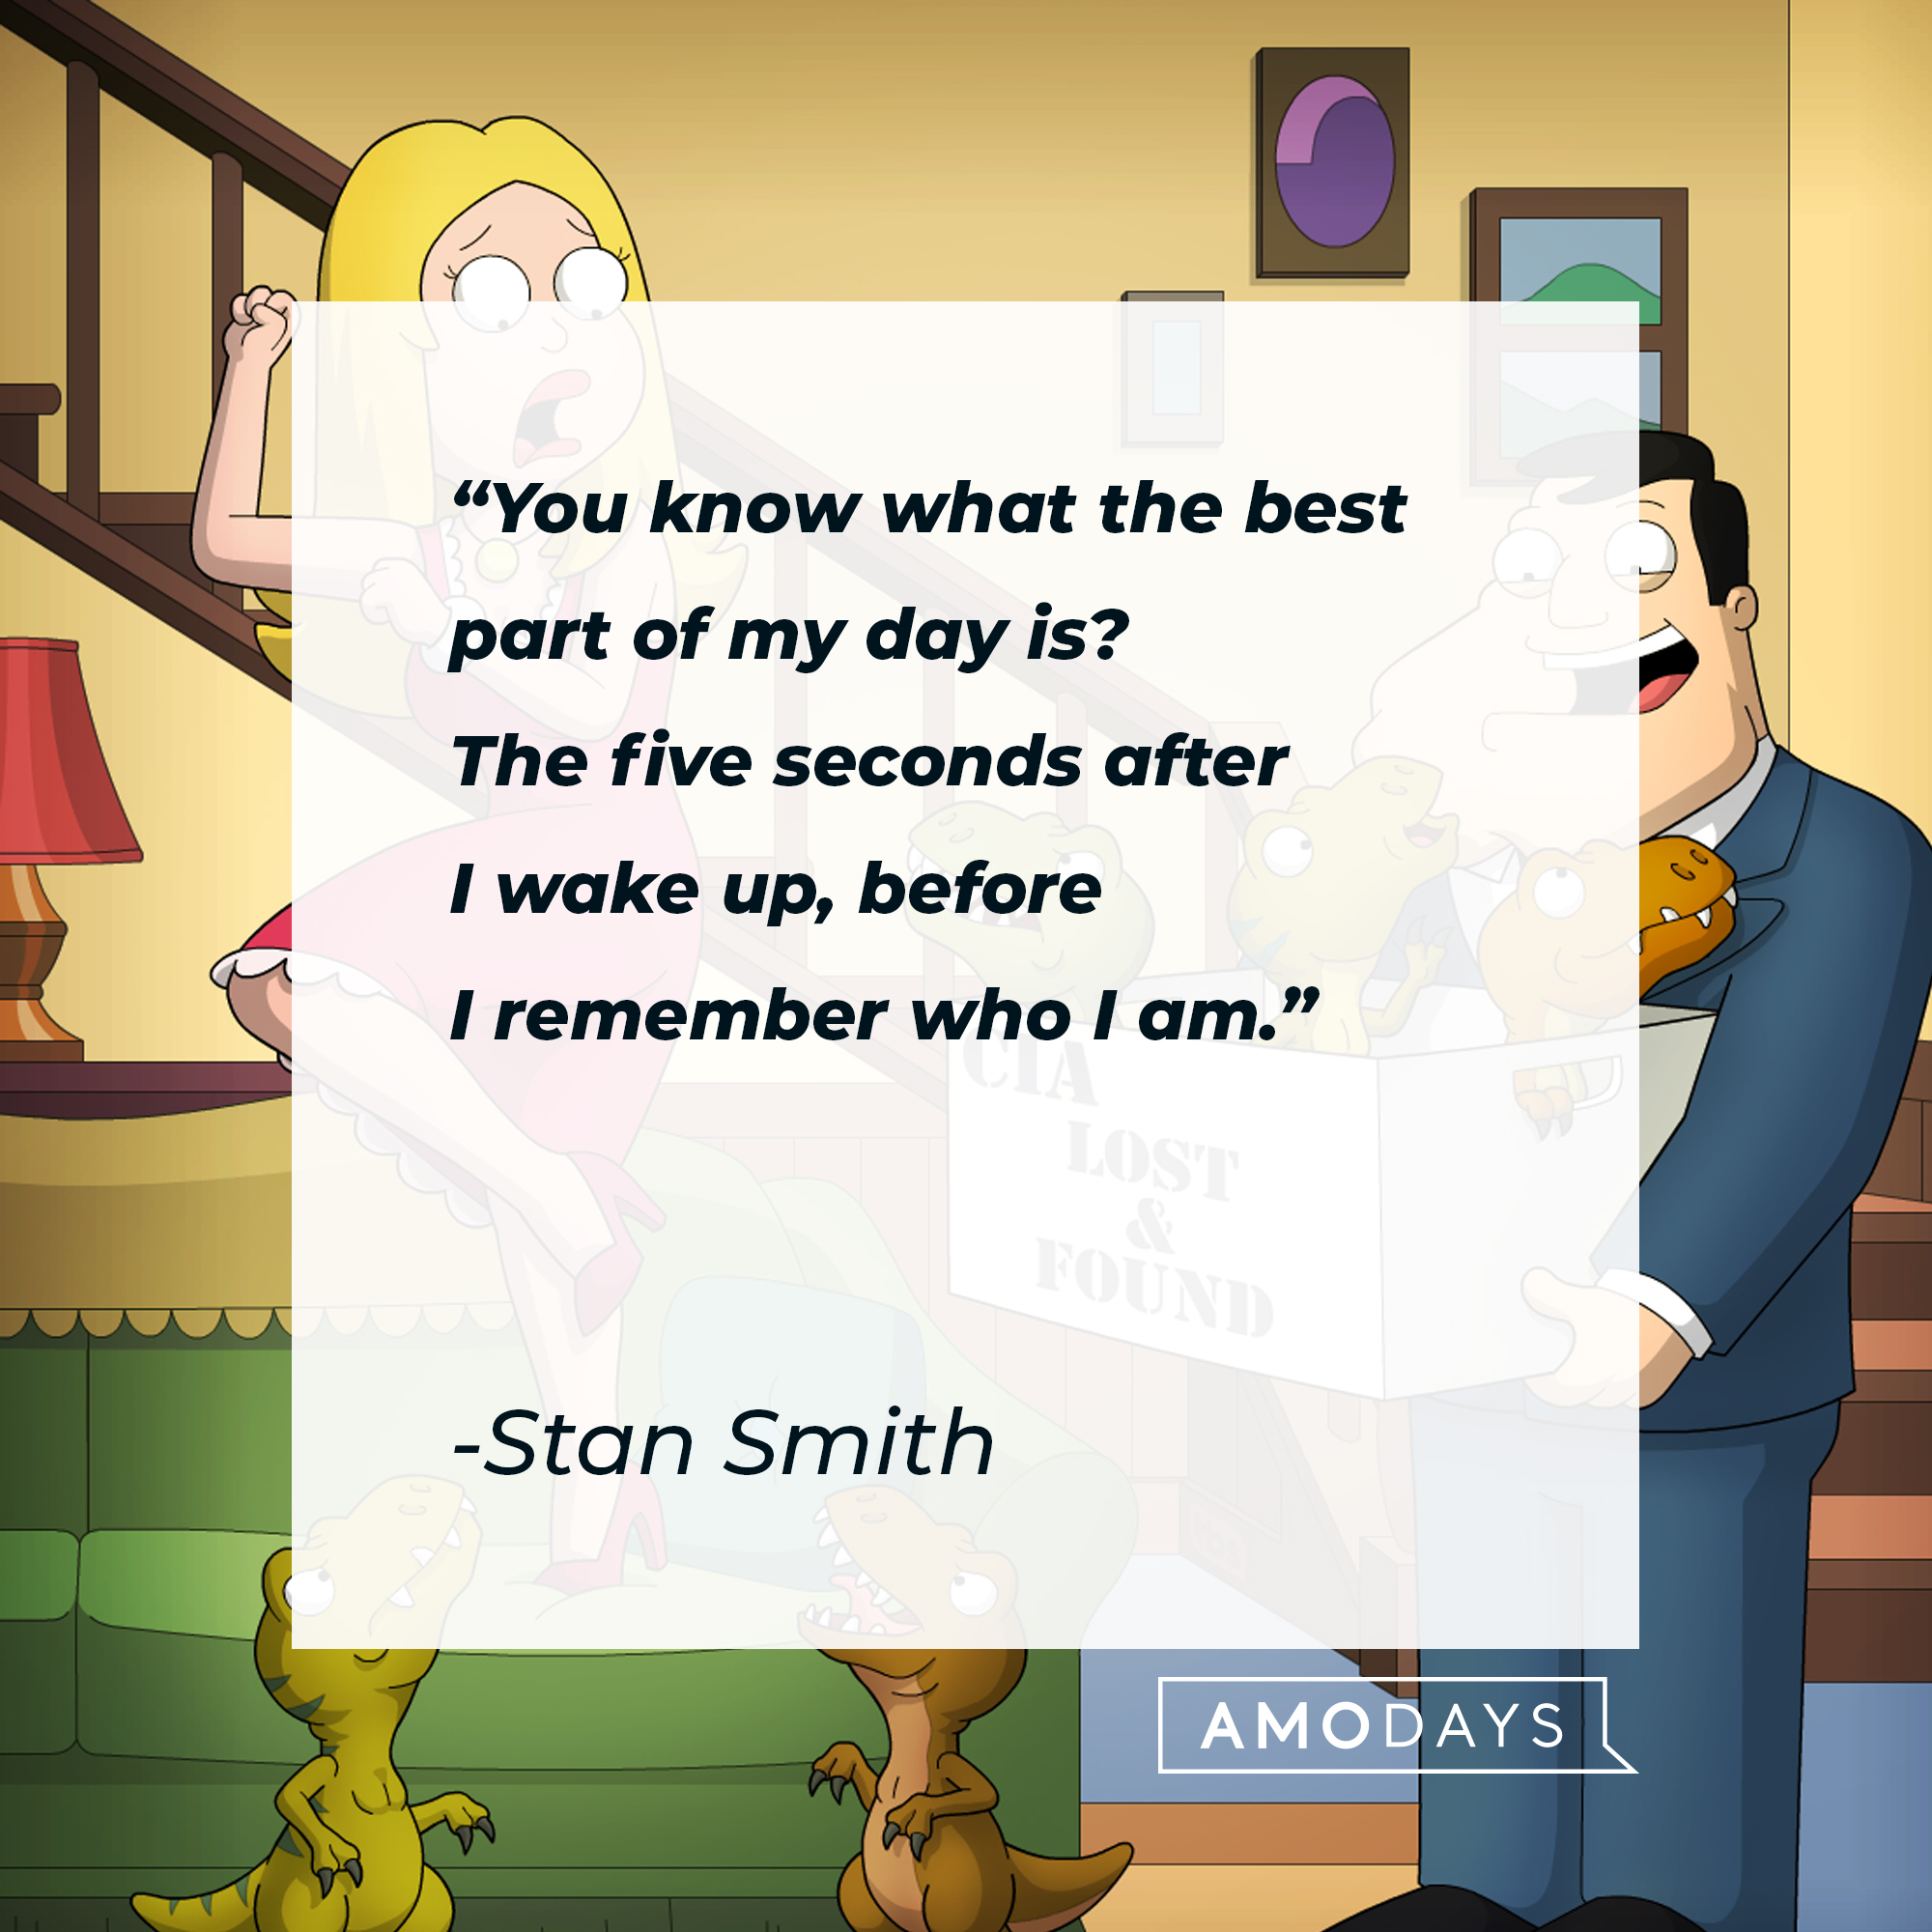 Stan Smith's quote: "You know what the best part of my day is? The five seconds after I wake up, before I remember who I am." | Source: facebook.com/AmericanDad